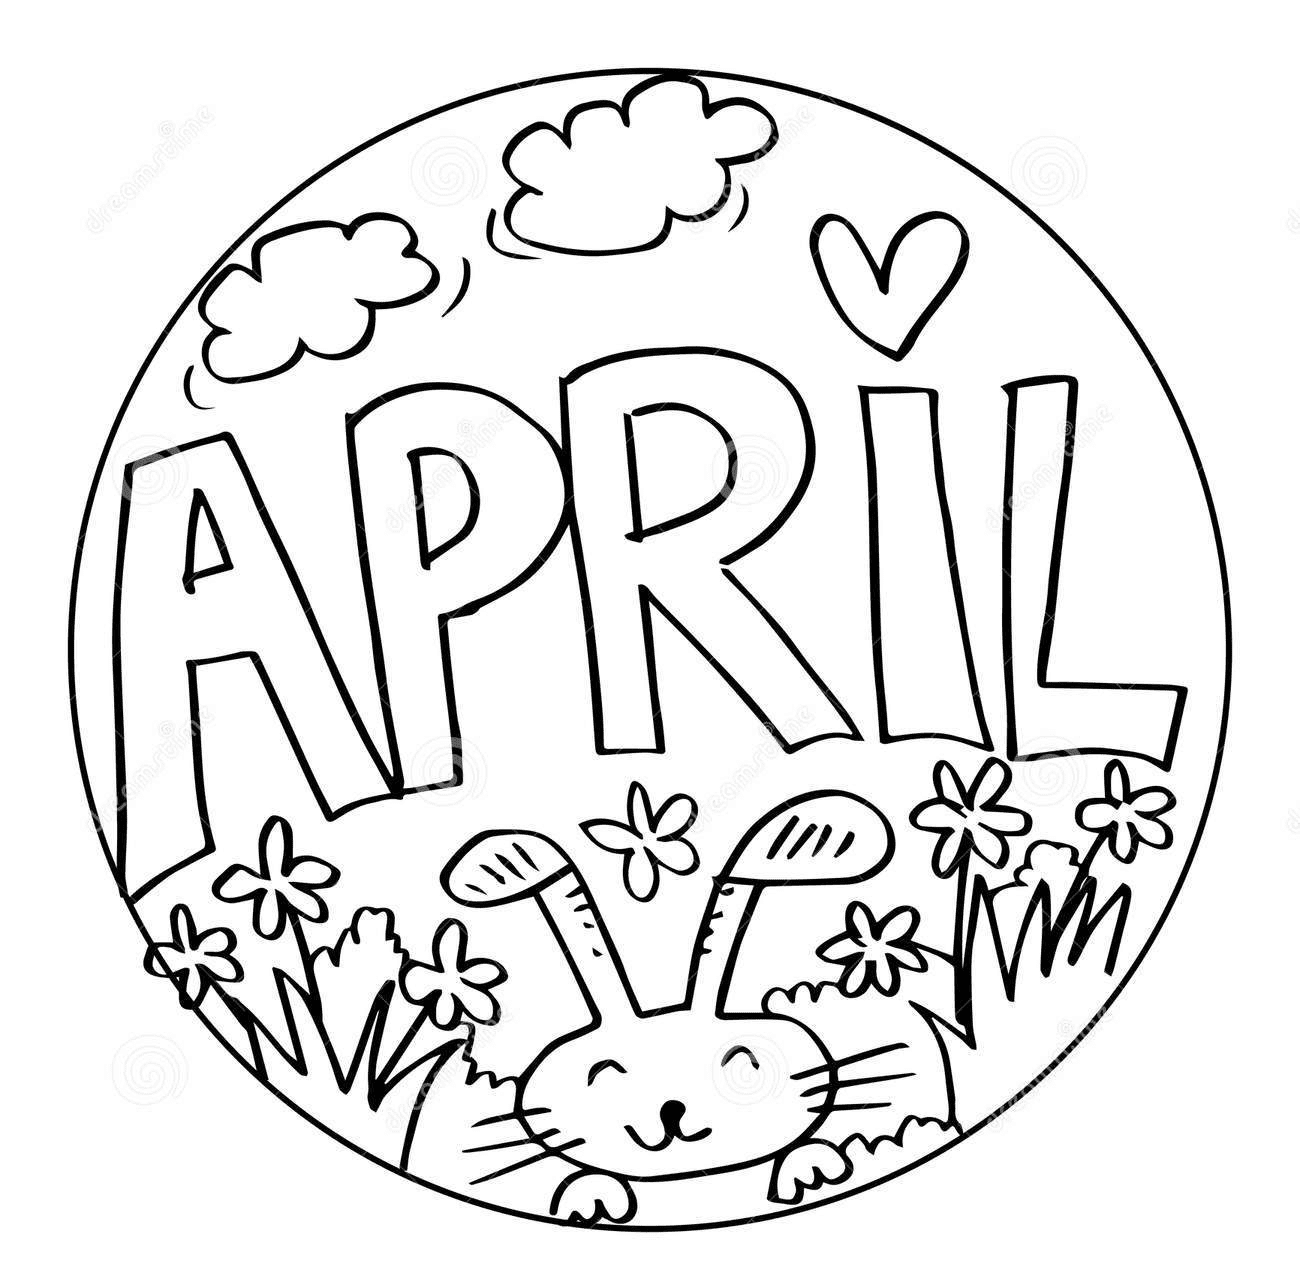 April for Kids Coloring Page